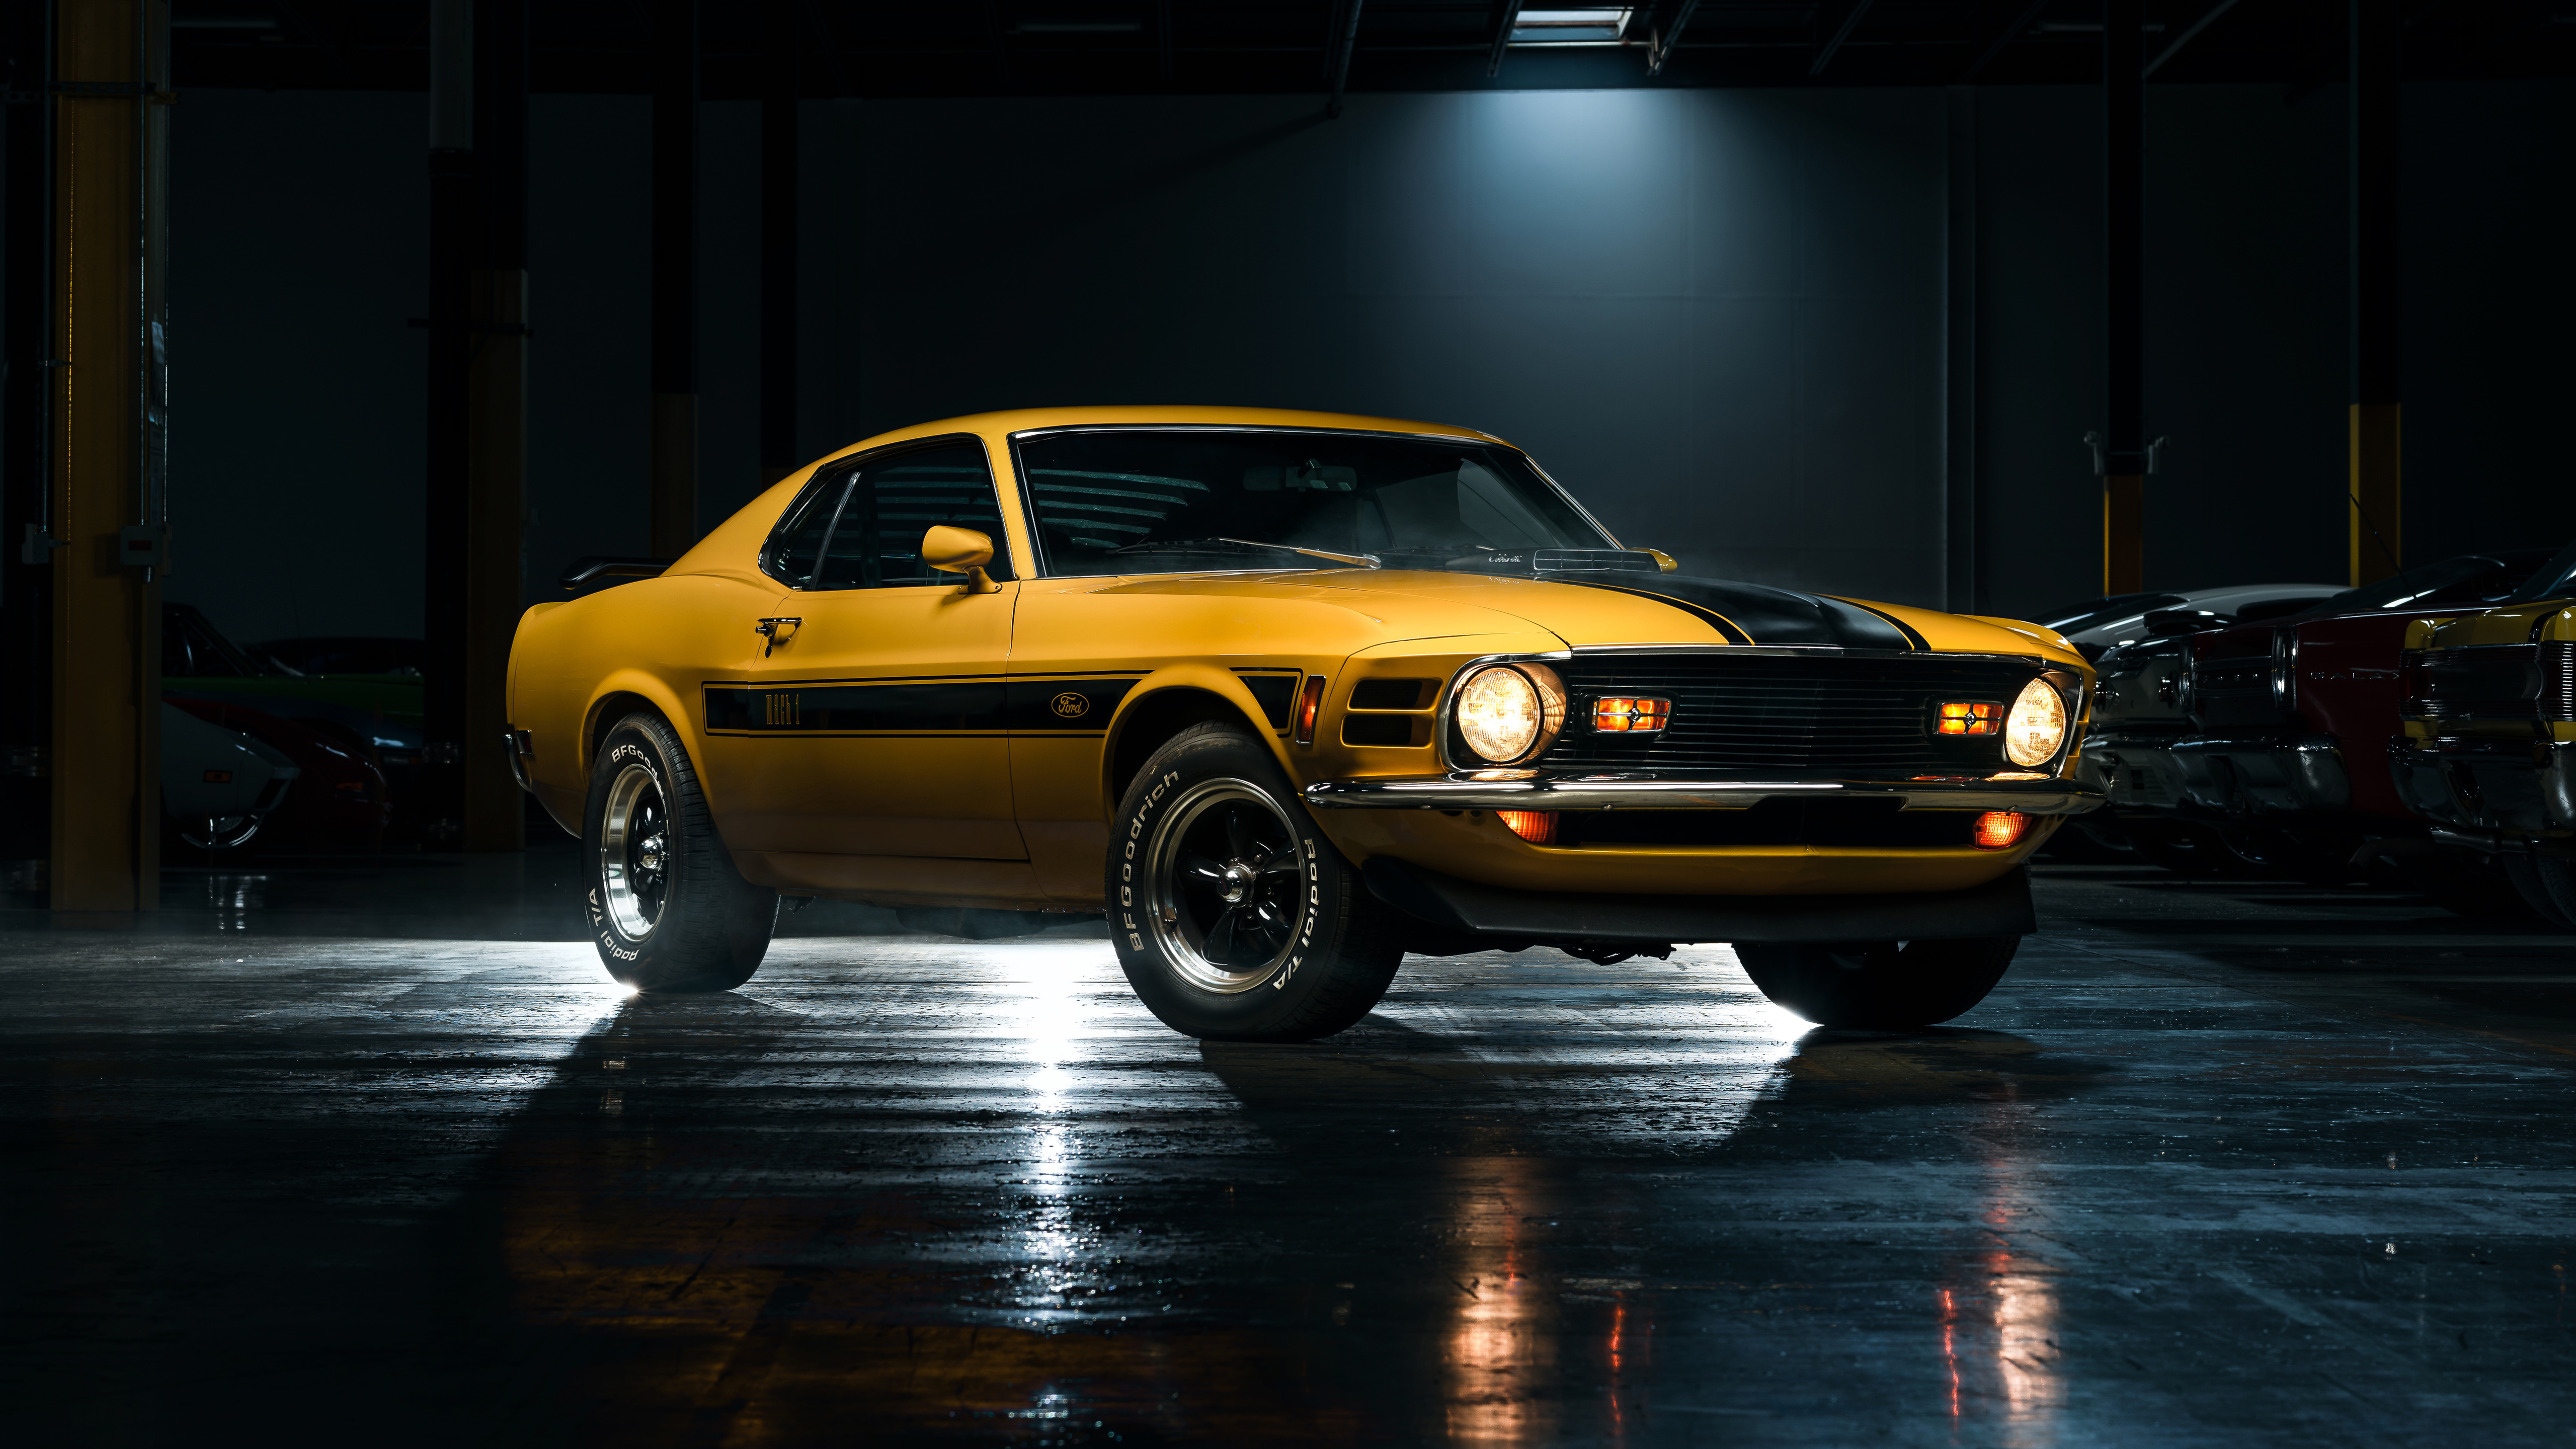 Ford Mustang Mach 1 Ford Mustang Ford Car Muscle Cars Yellow Cars Low Light Parking Lot 5120x2880